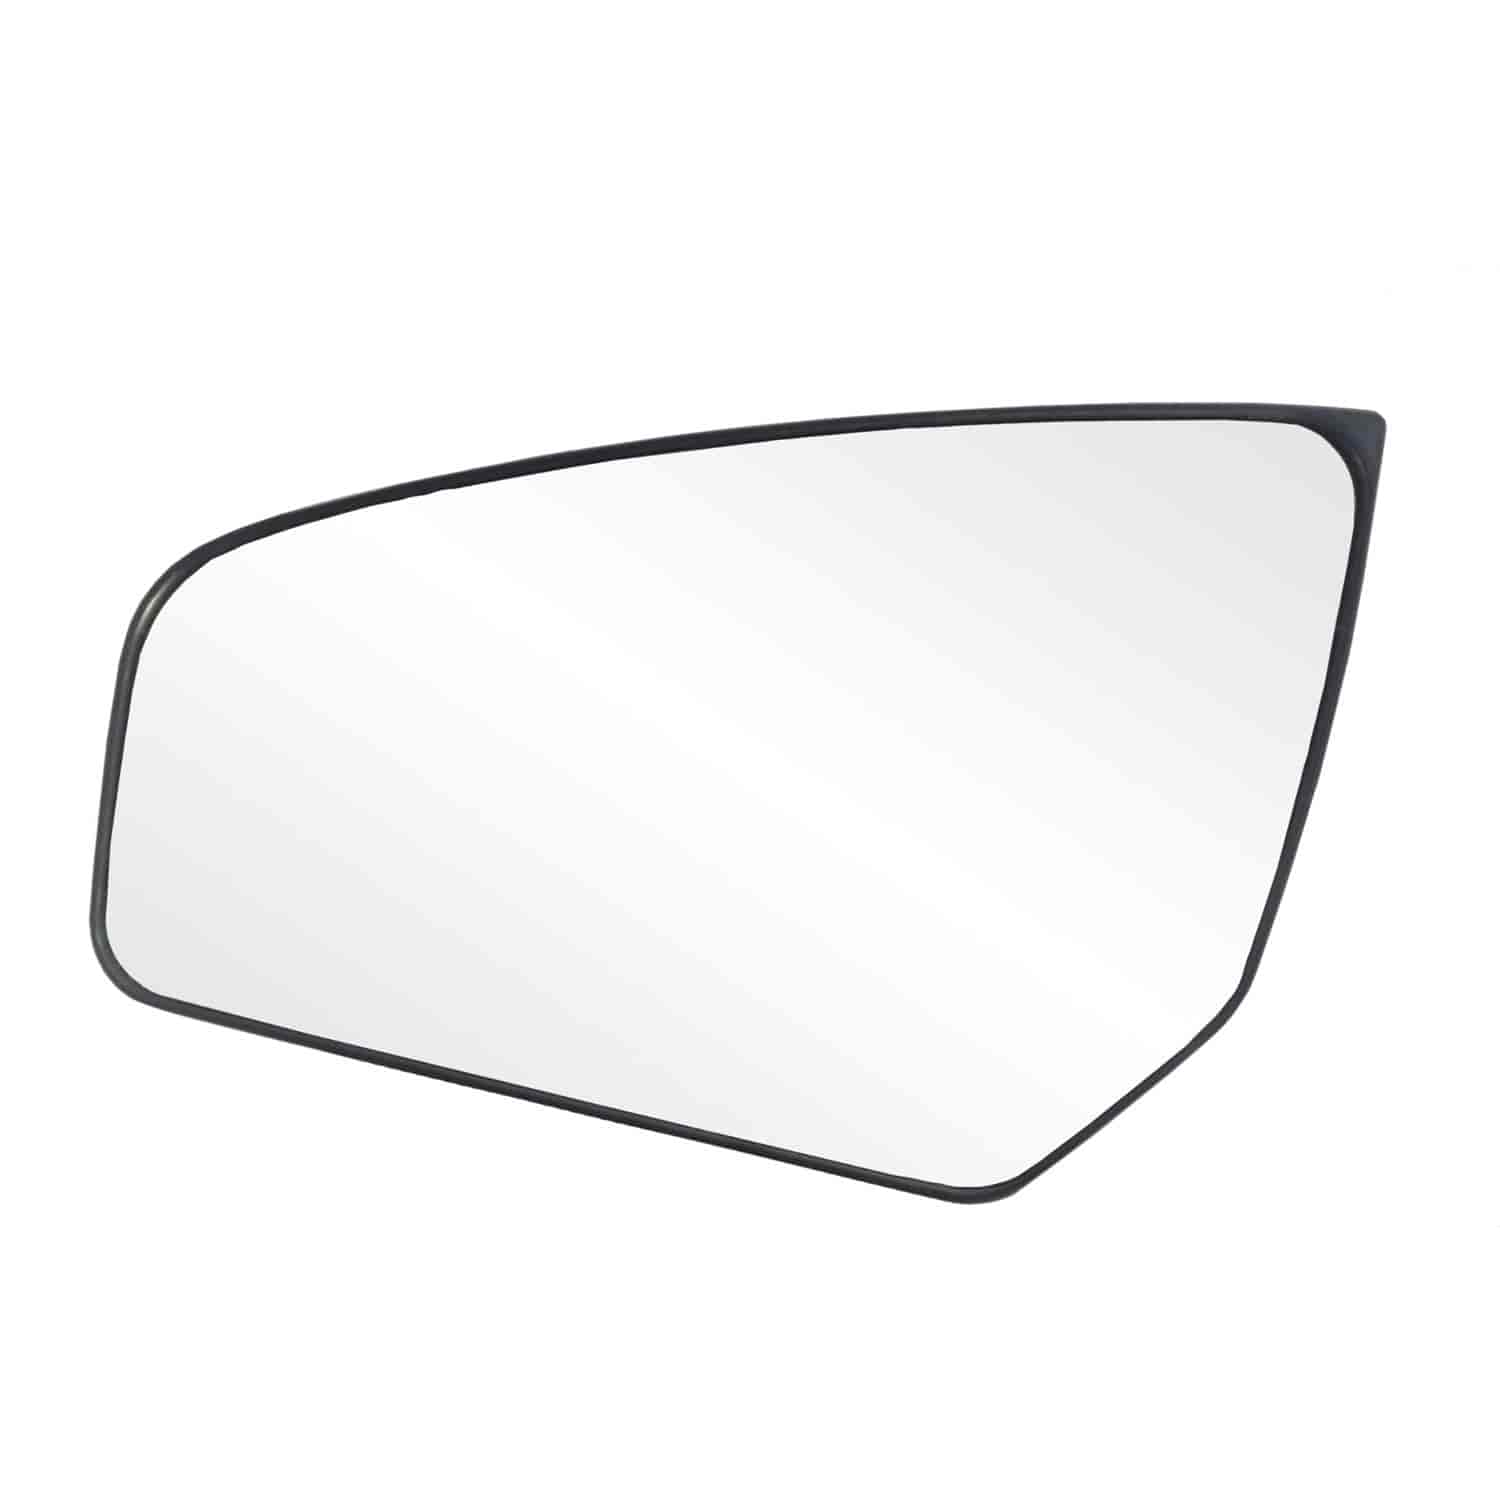 Replacement Glass Assembly for 07-12 Sentra replace your cracked or broken driver side mirror glass